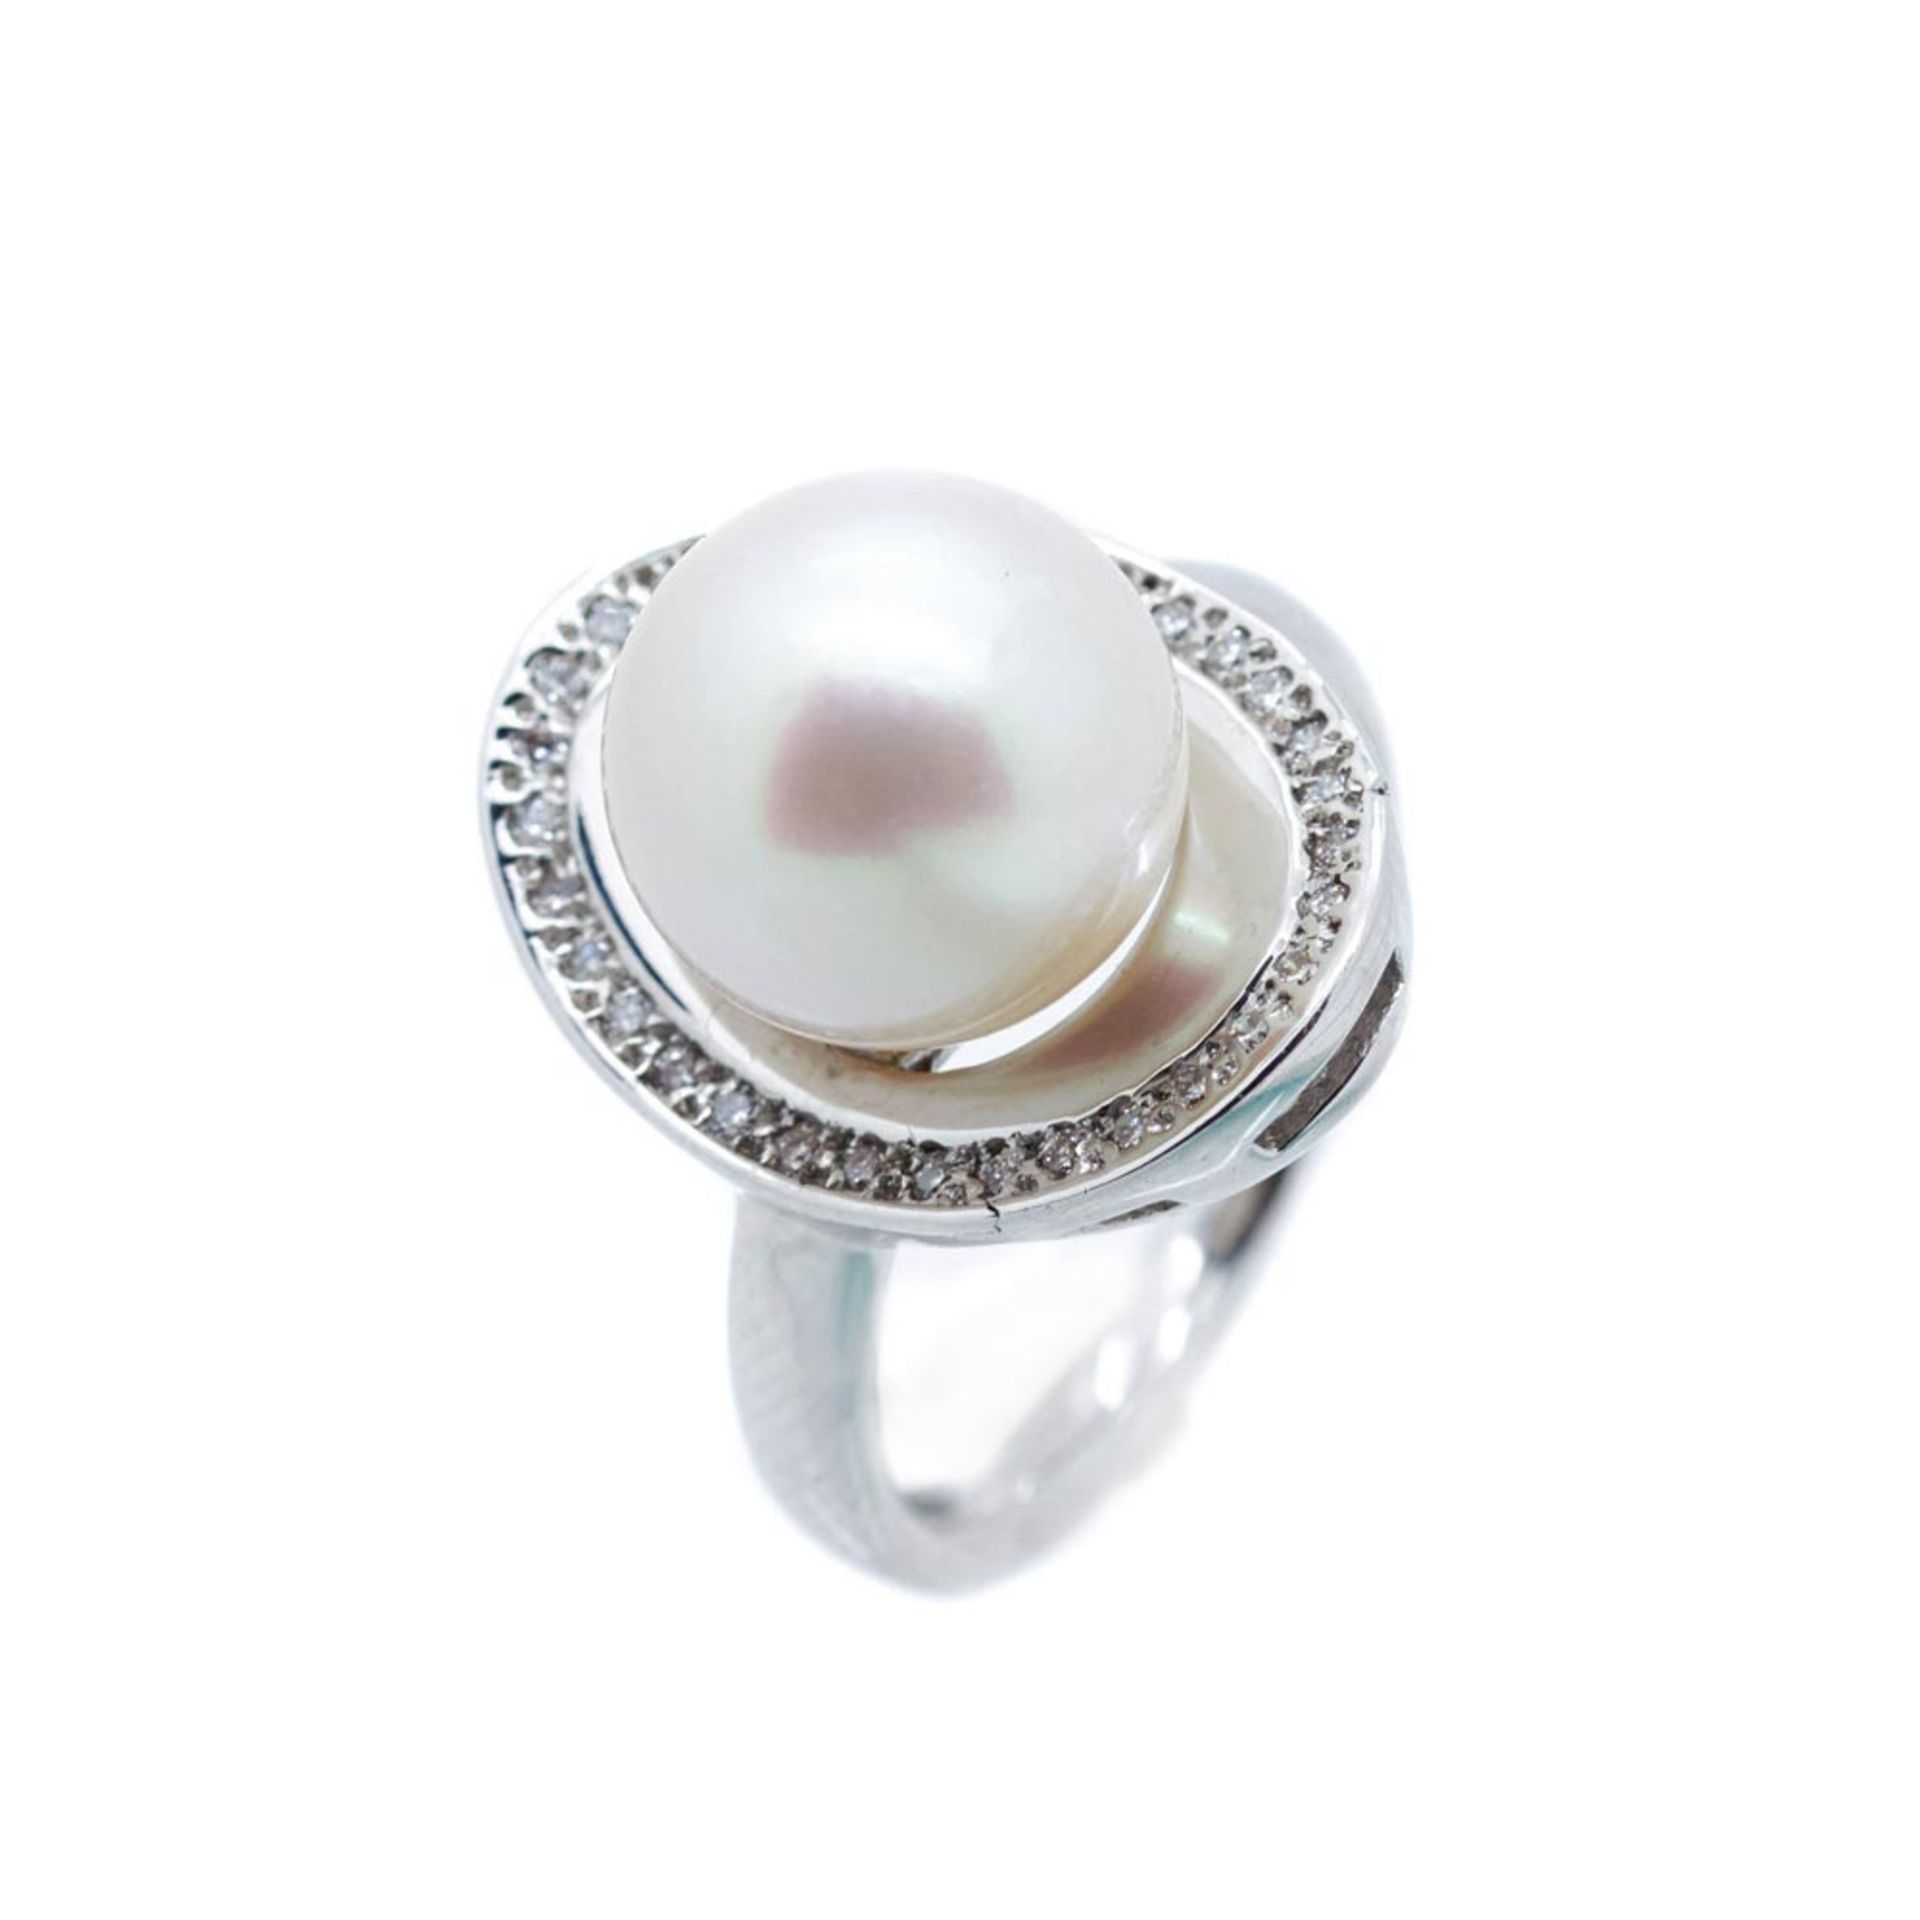 White gold, diamonds and cultured pearl ring